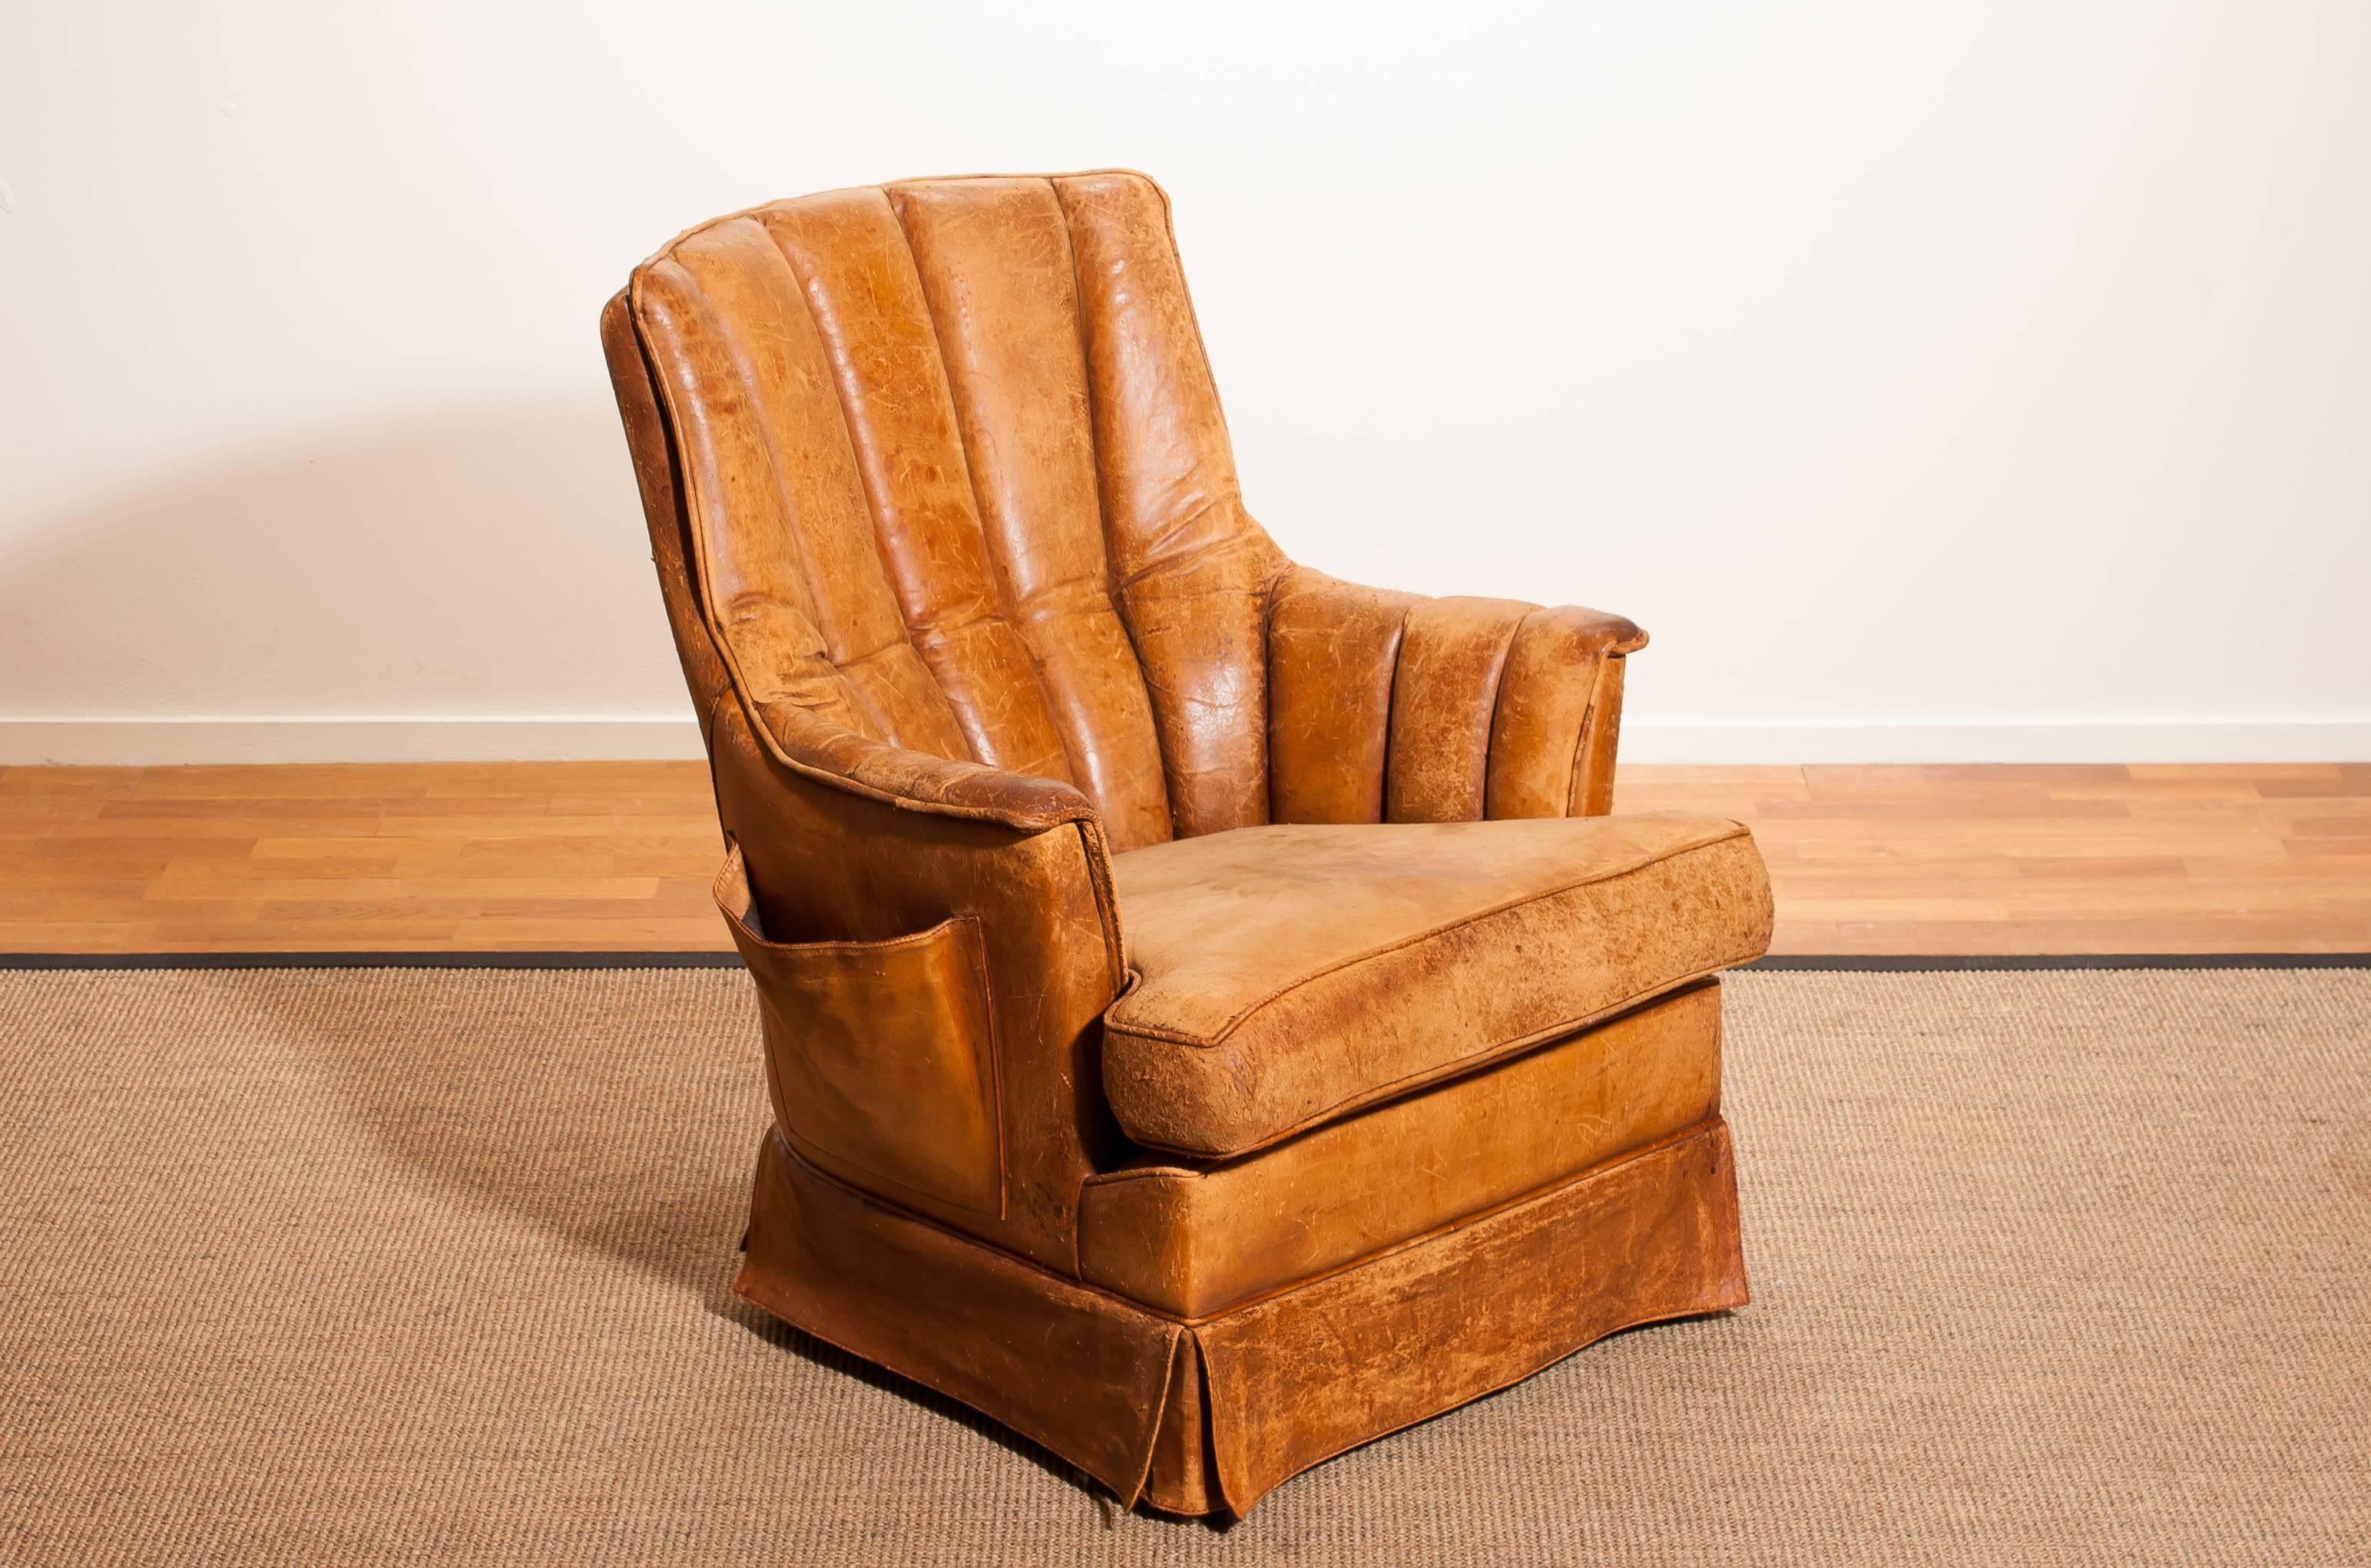 Fantastic club - armchair from France.
This chair is made of sheep leather with skirt and a magazine bag on its side.
It has a greatly used patina.
Period 1940s
Dimensions: H 85 cm, W 75 cm, D 68 cm, Sh 46 cm.